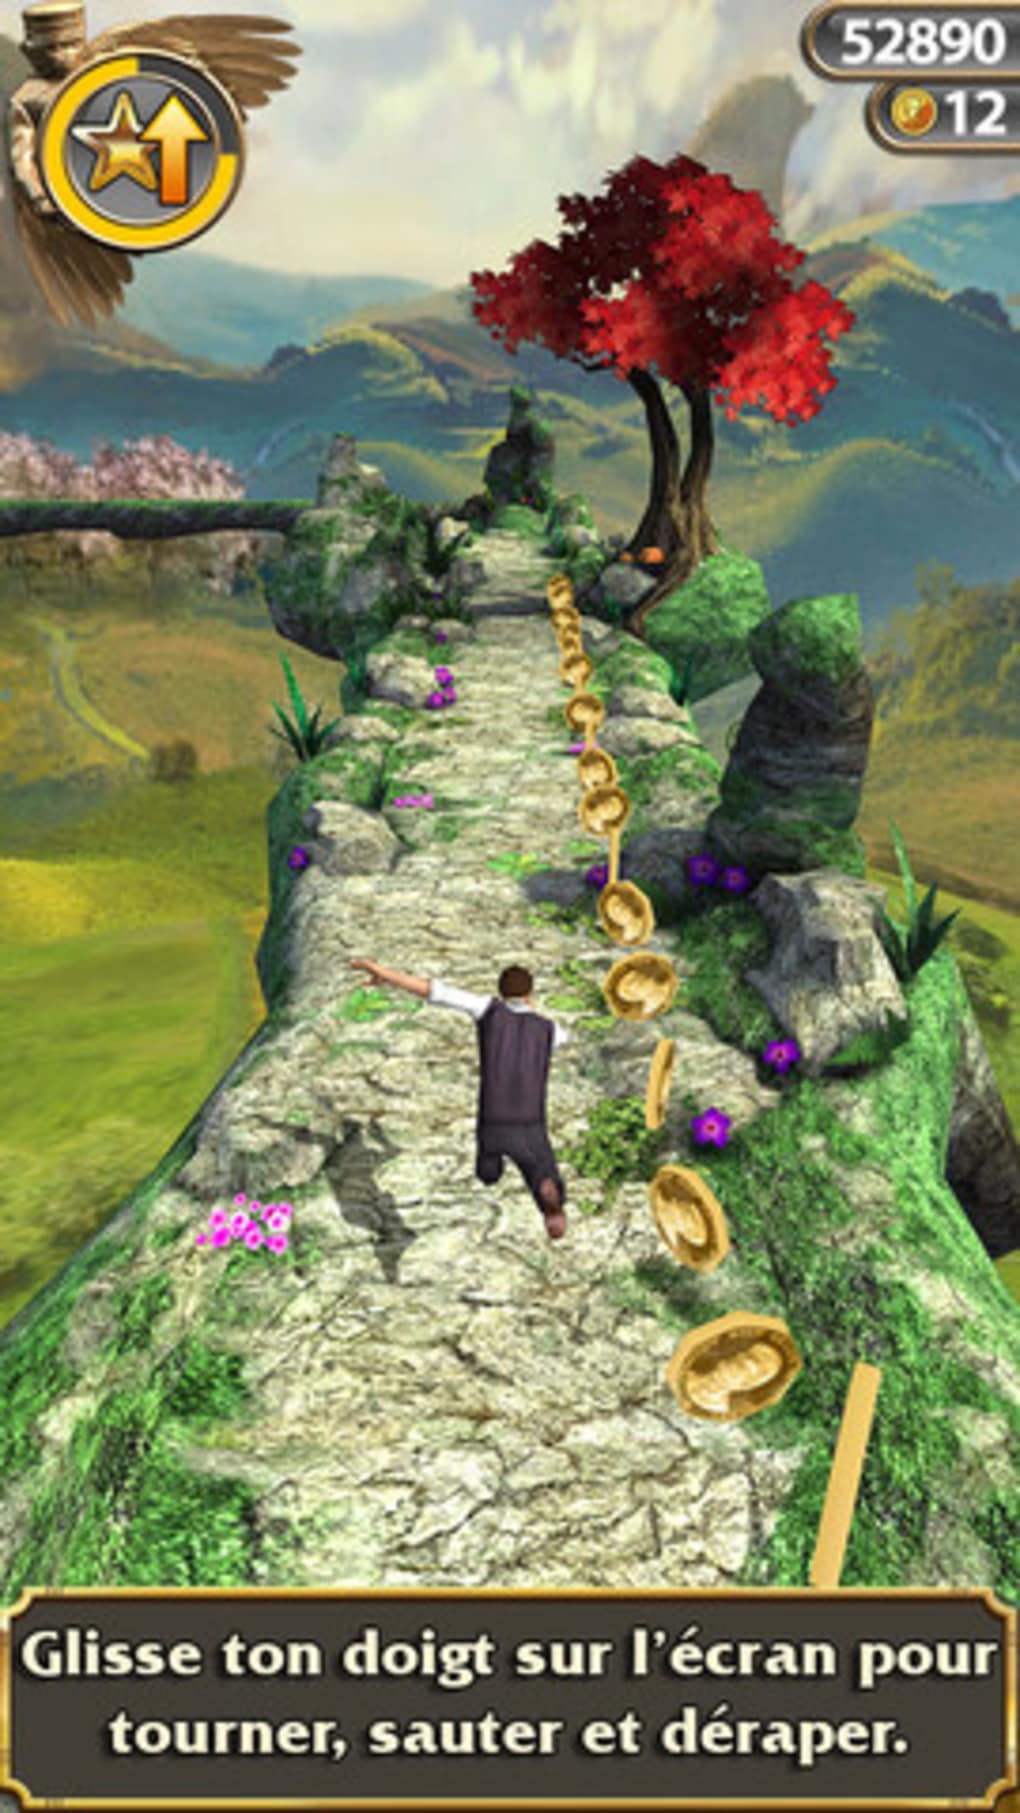 Temple run games for pc